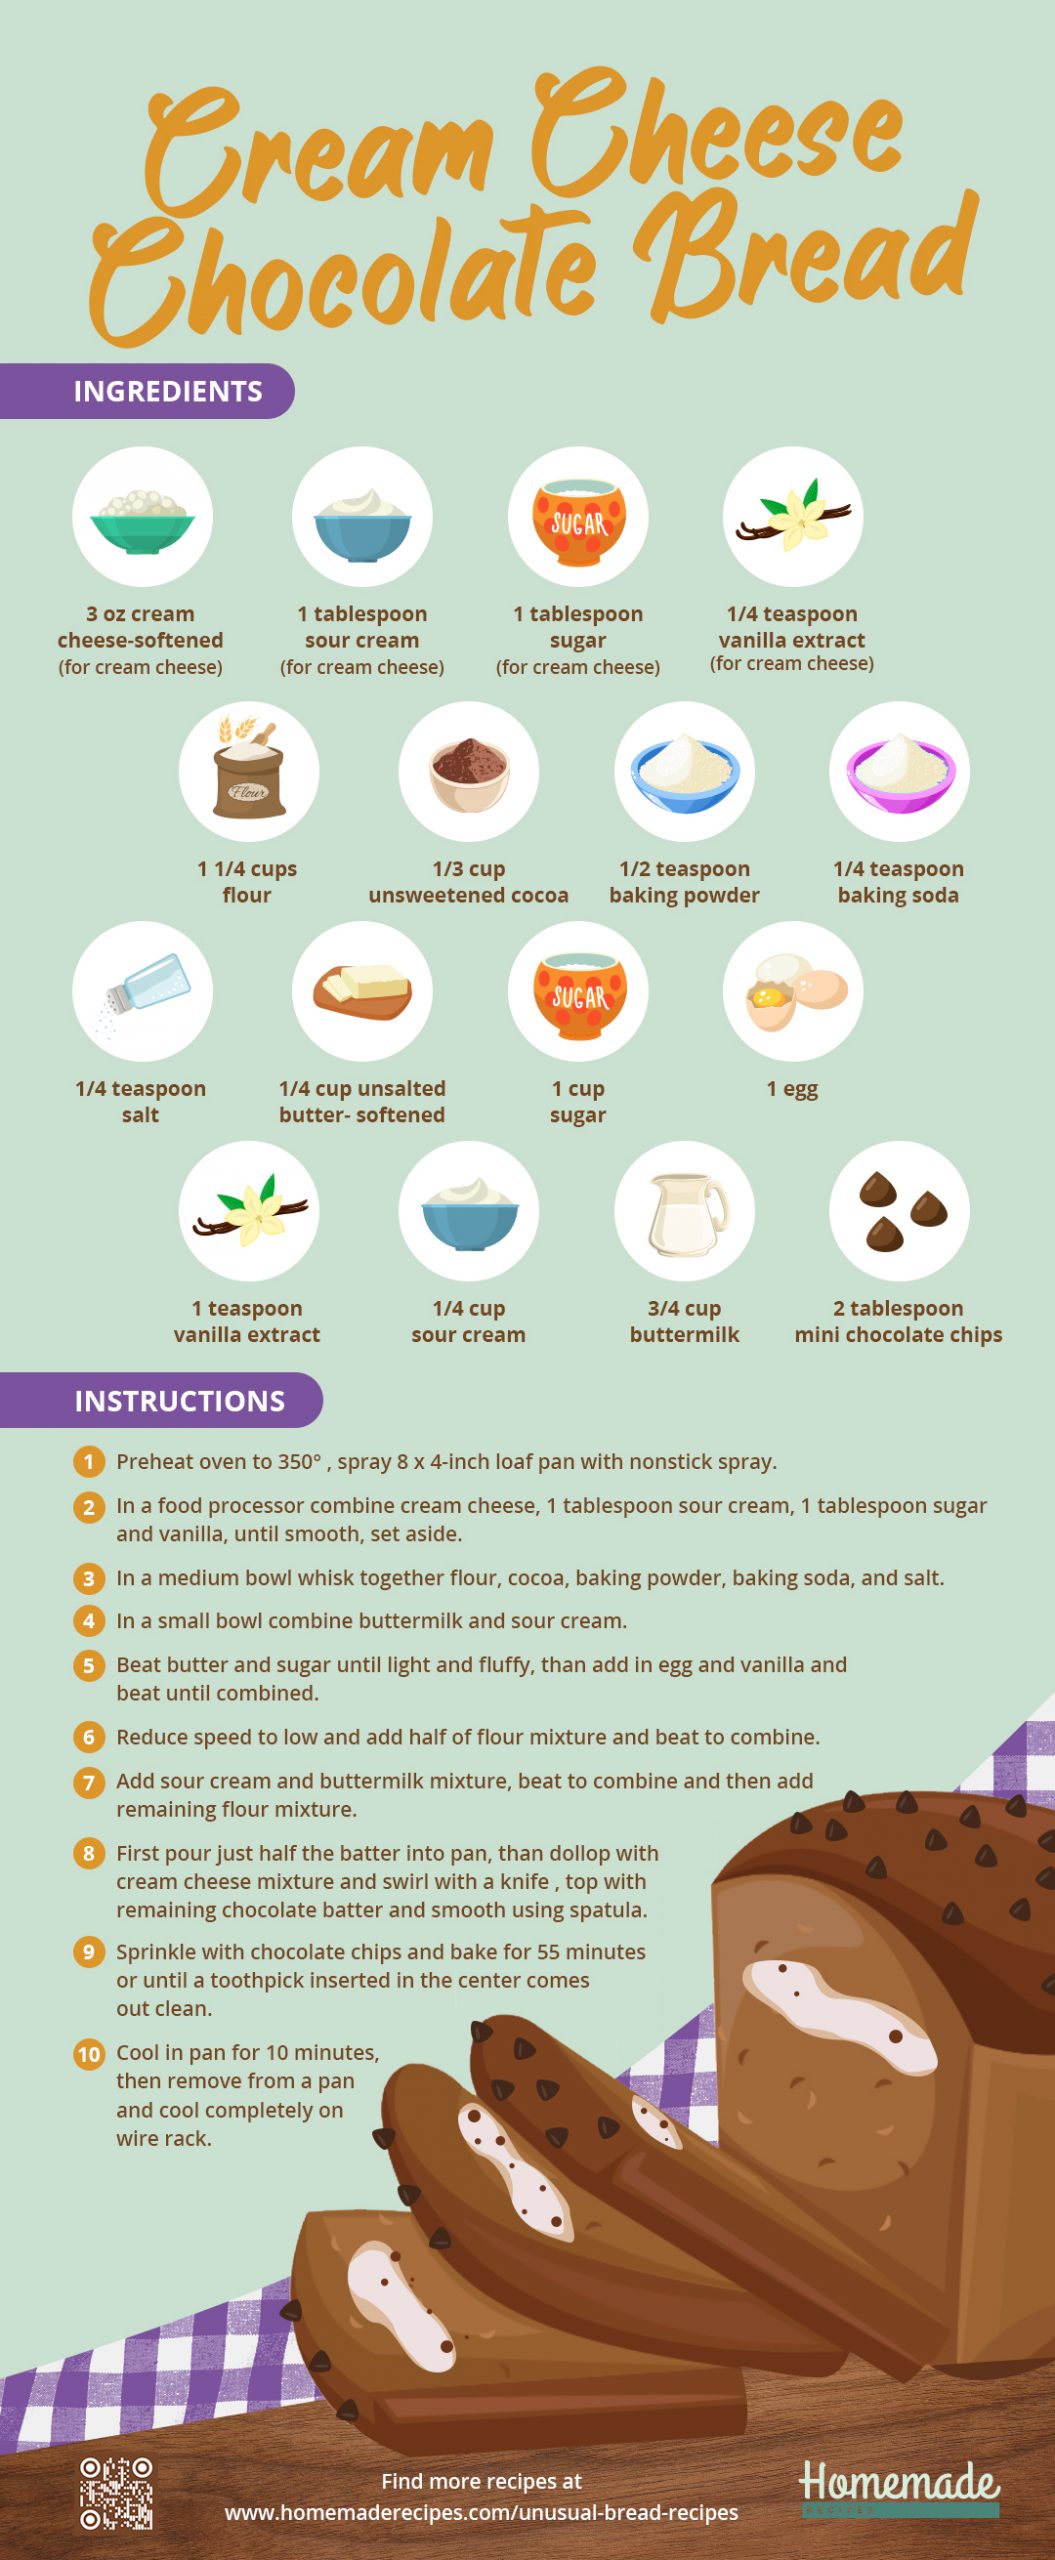 Cream Cheese Chocolate Bread | Unusual Bread Recipes You Have To Try [INFOGRAPHIC]